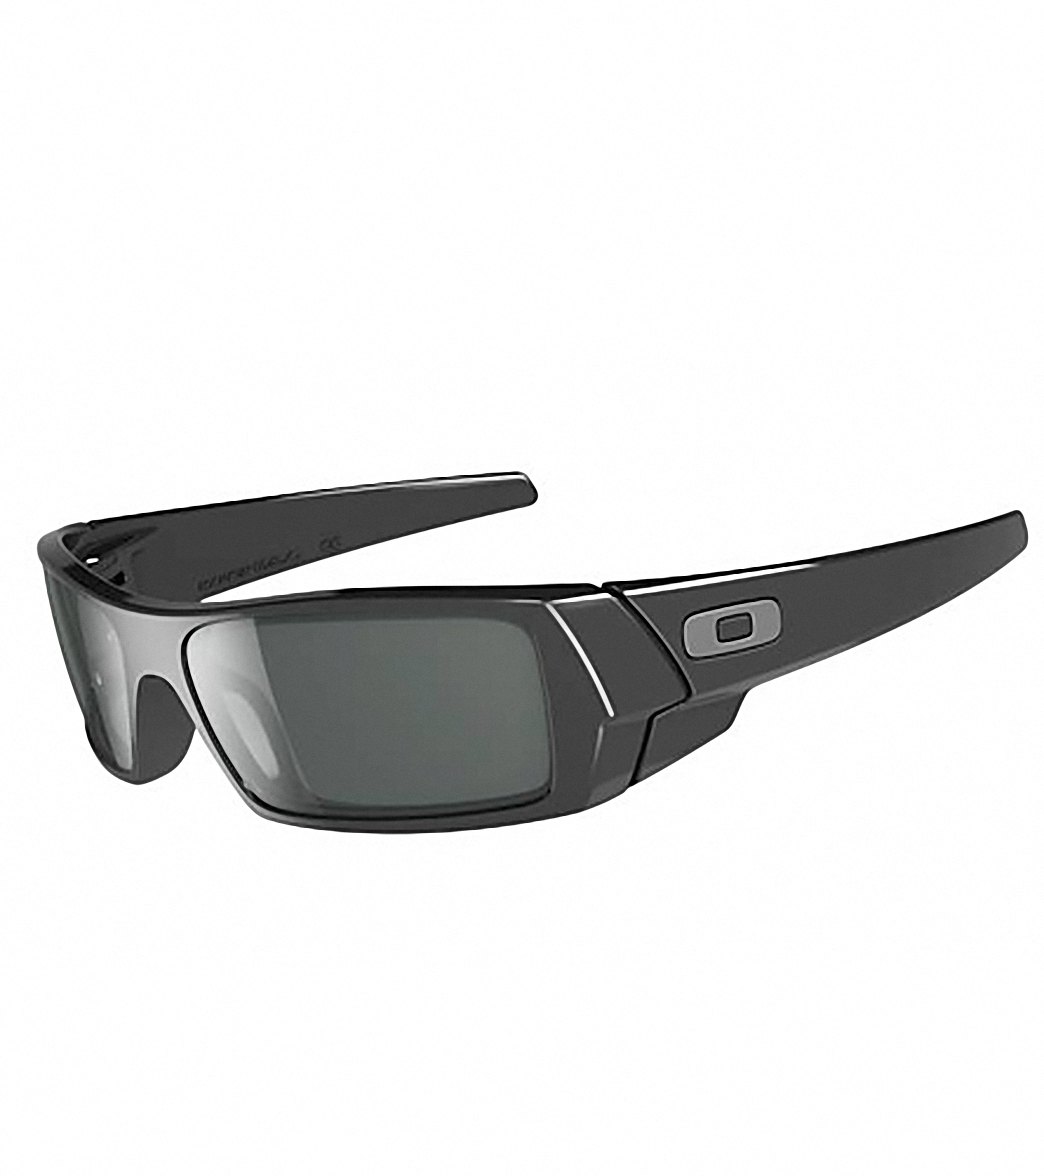 Oakley Gascan Sunglasses at SwimOutlet.com - Free Shipping